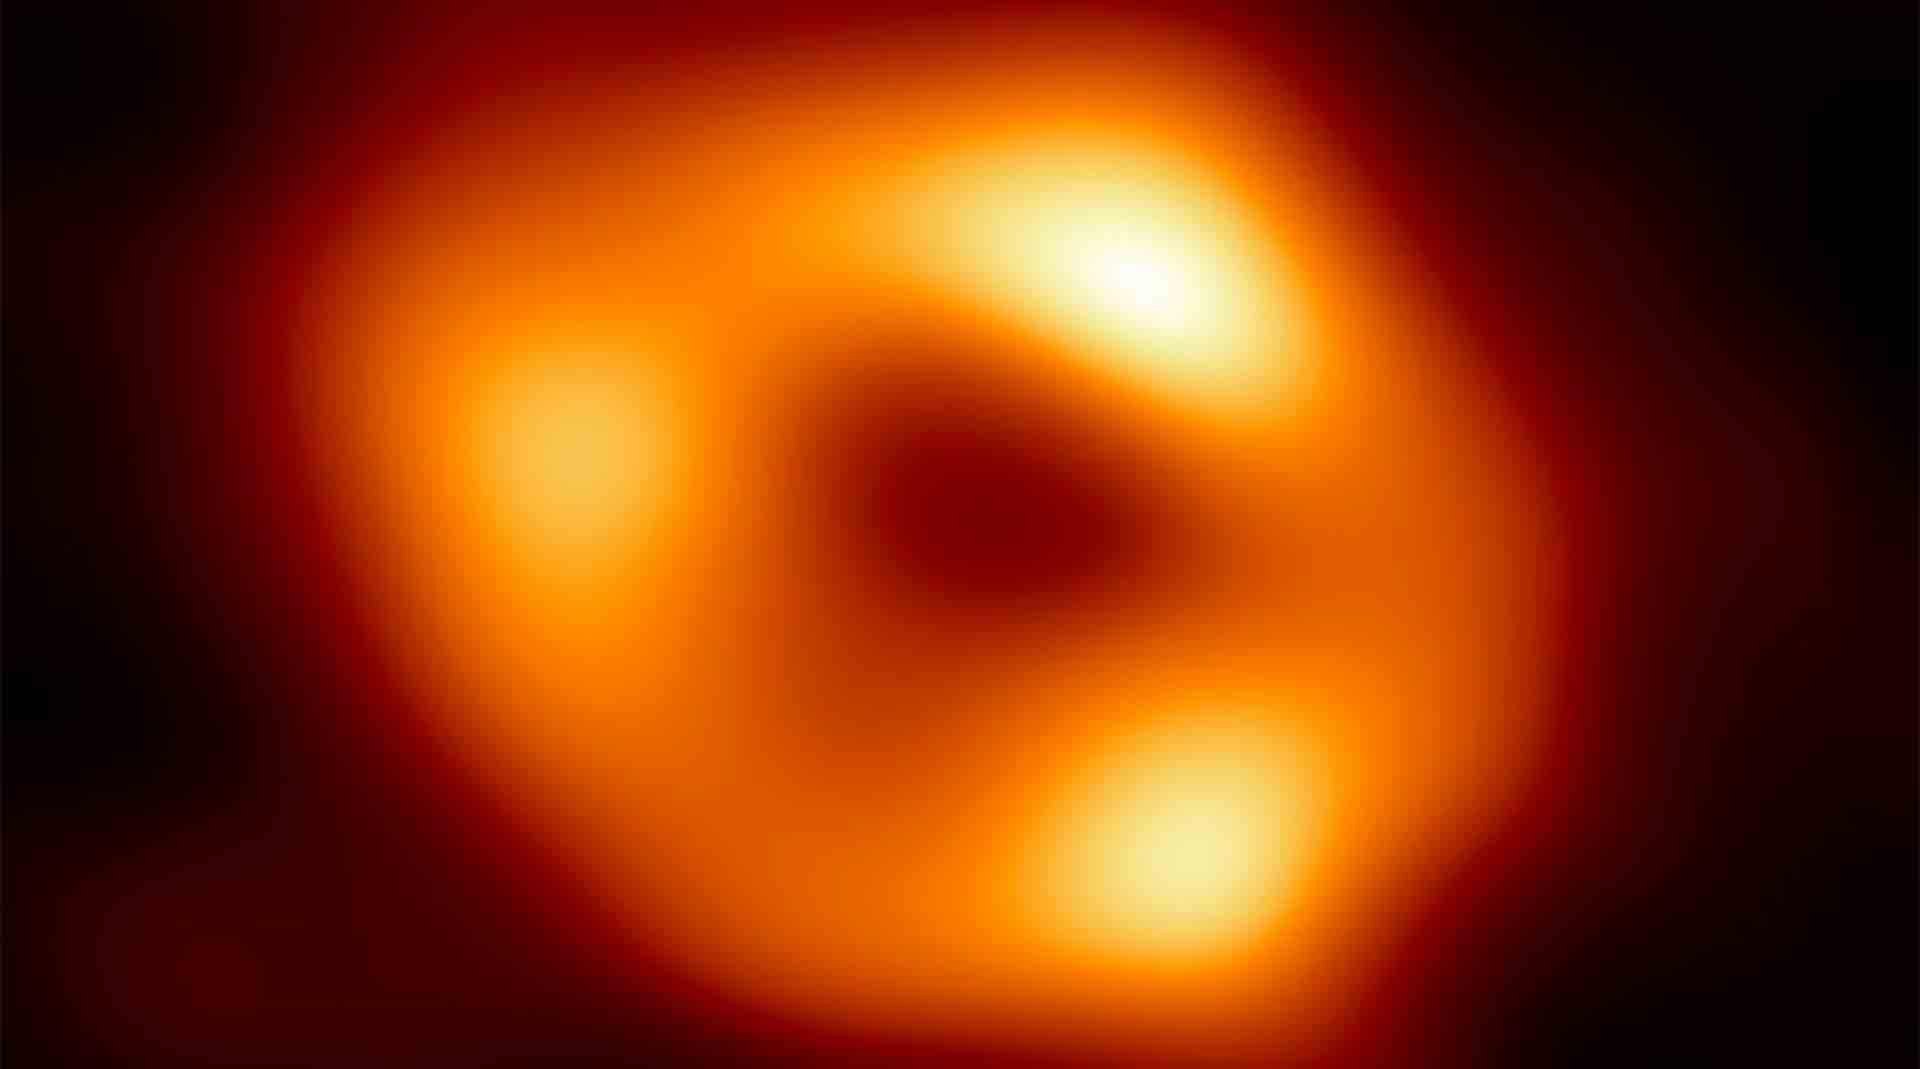 The Milky Way's black hole pictured by the Event Horizon Telescope.